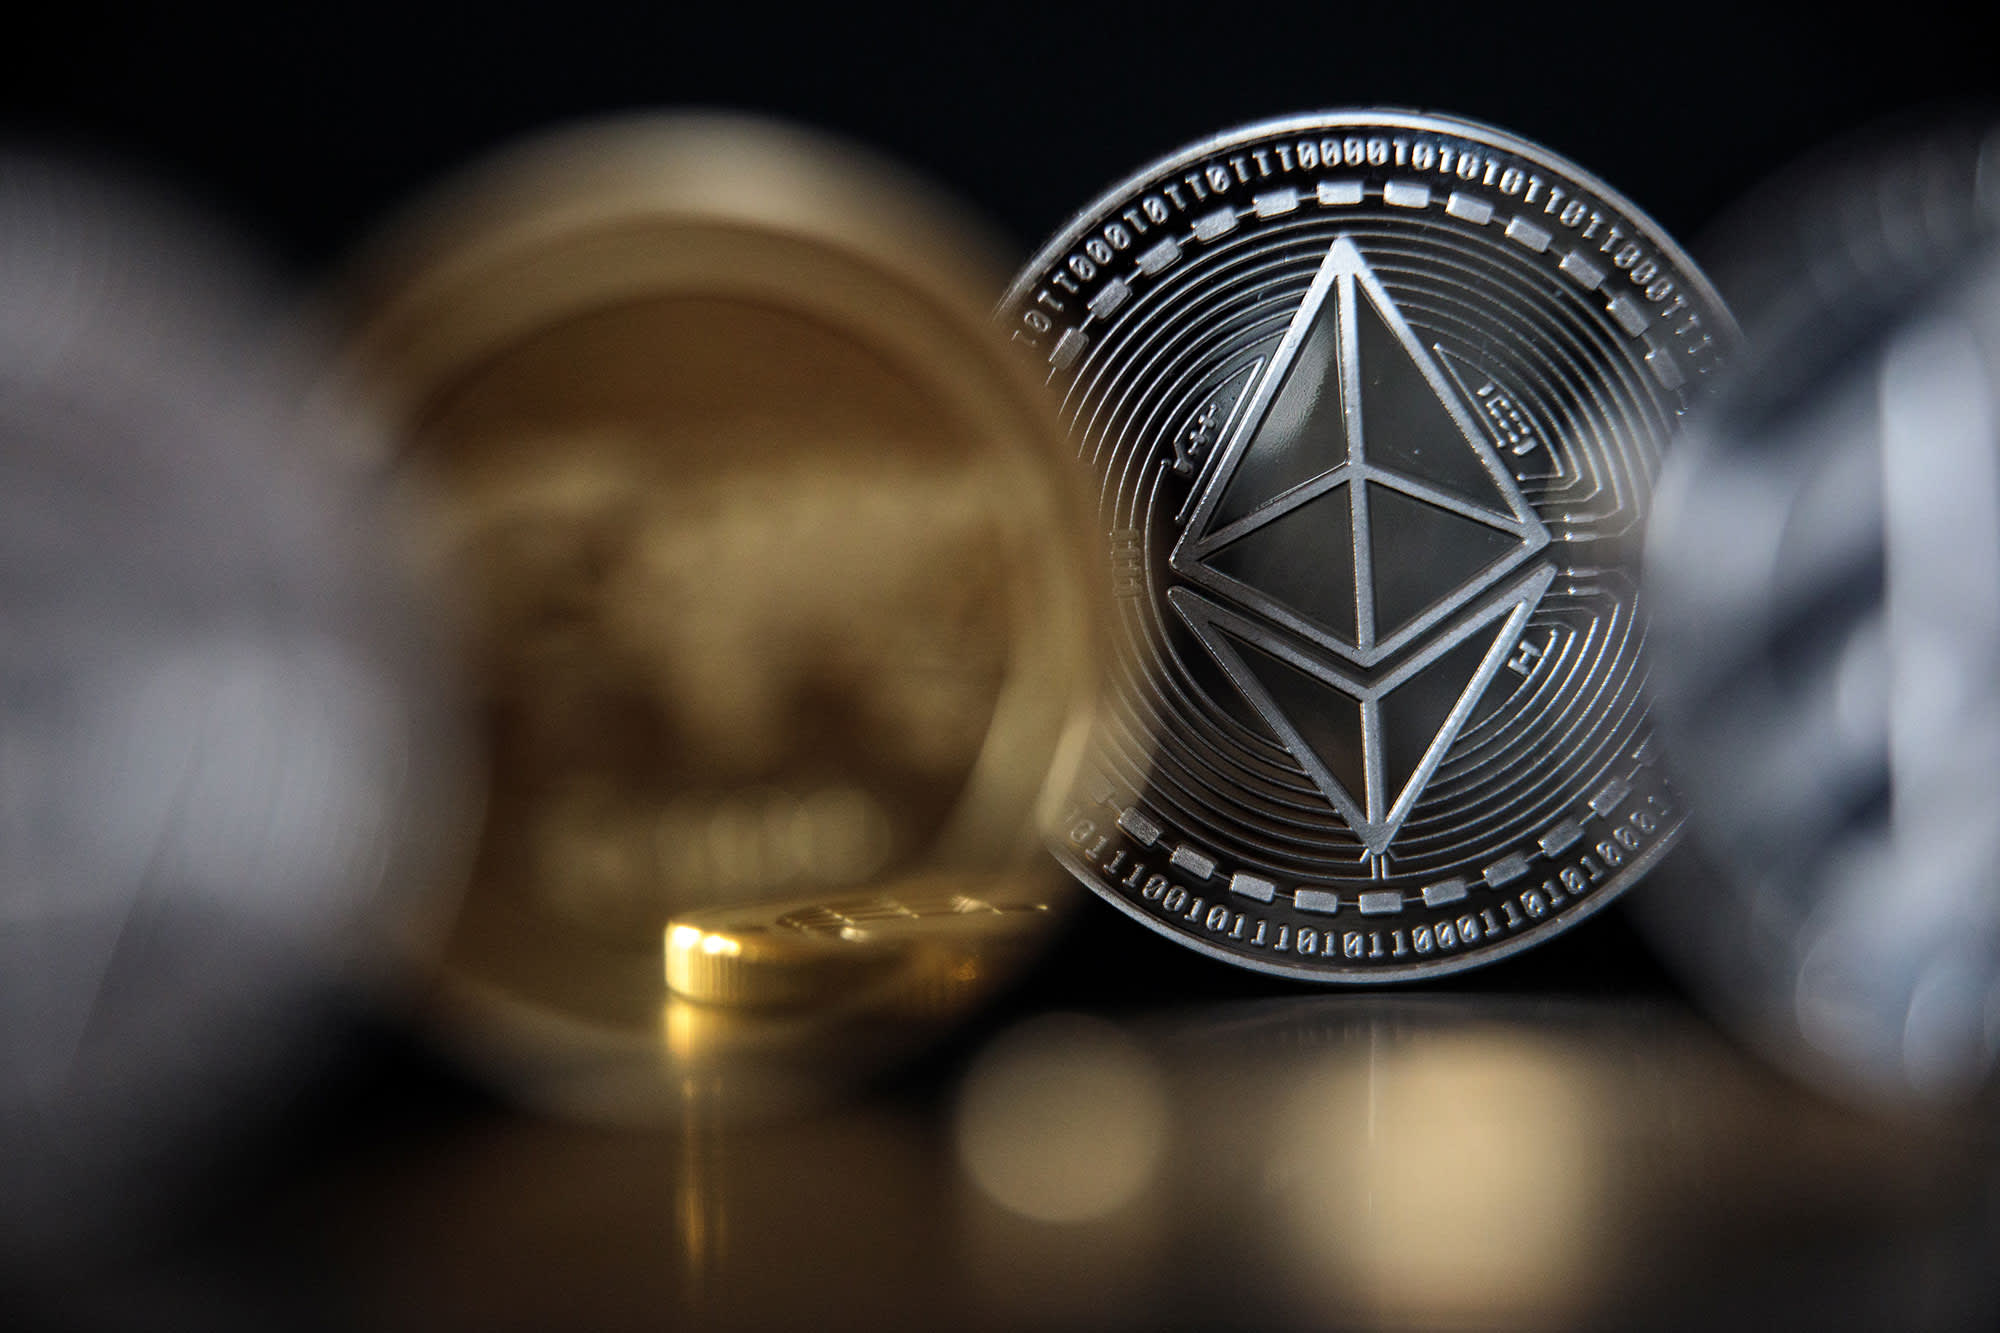 The prices of ether, XRP and litecoin rise after bitcoin amounts to $ 34,000